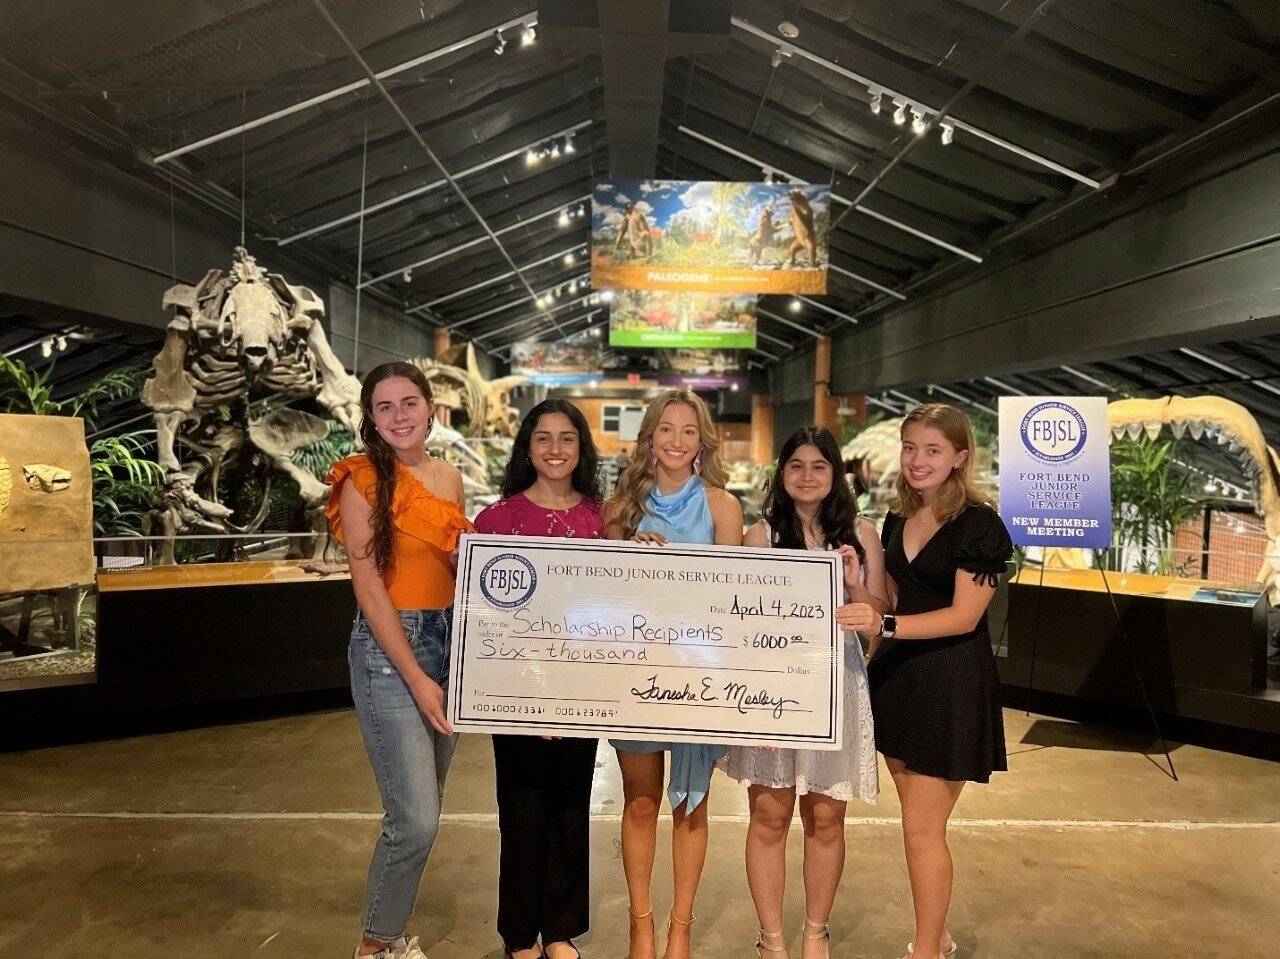 From left, Hadley Boudreaux, Katherine Bourgeois, Anvi Garyali, Ria Tahwar and Emilie Wakeman have received $1,000 scholarships from the Fort Bend Junior Service League. Not pictured: Alifiya Saleem.